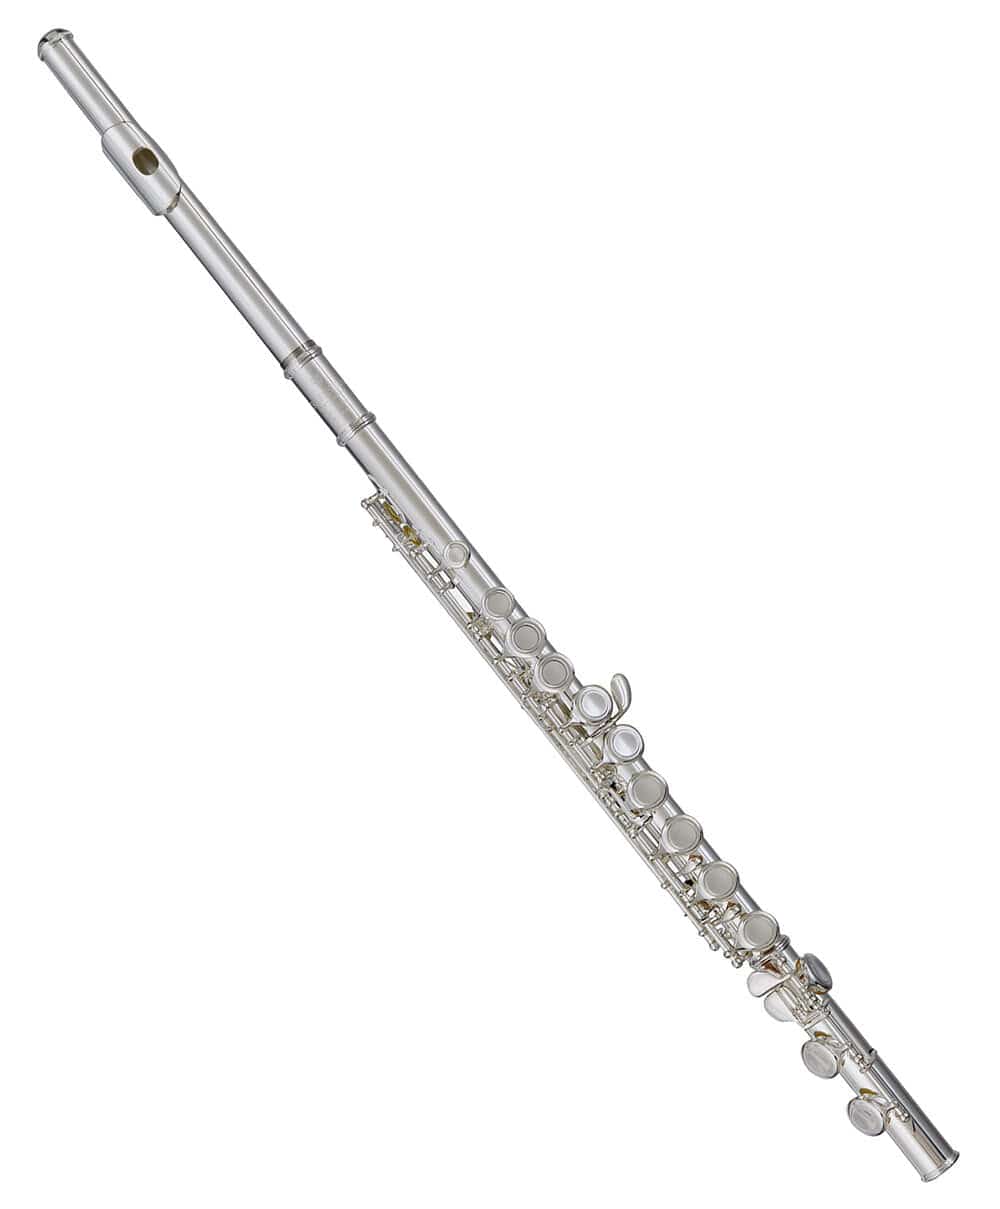 Blessing BFL-1287 Flute (C) Silver Plated Finish - Joondalup Music Centre